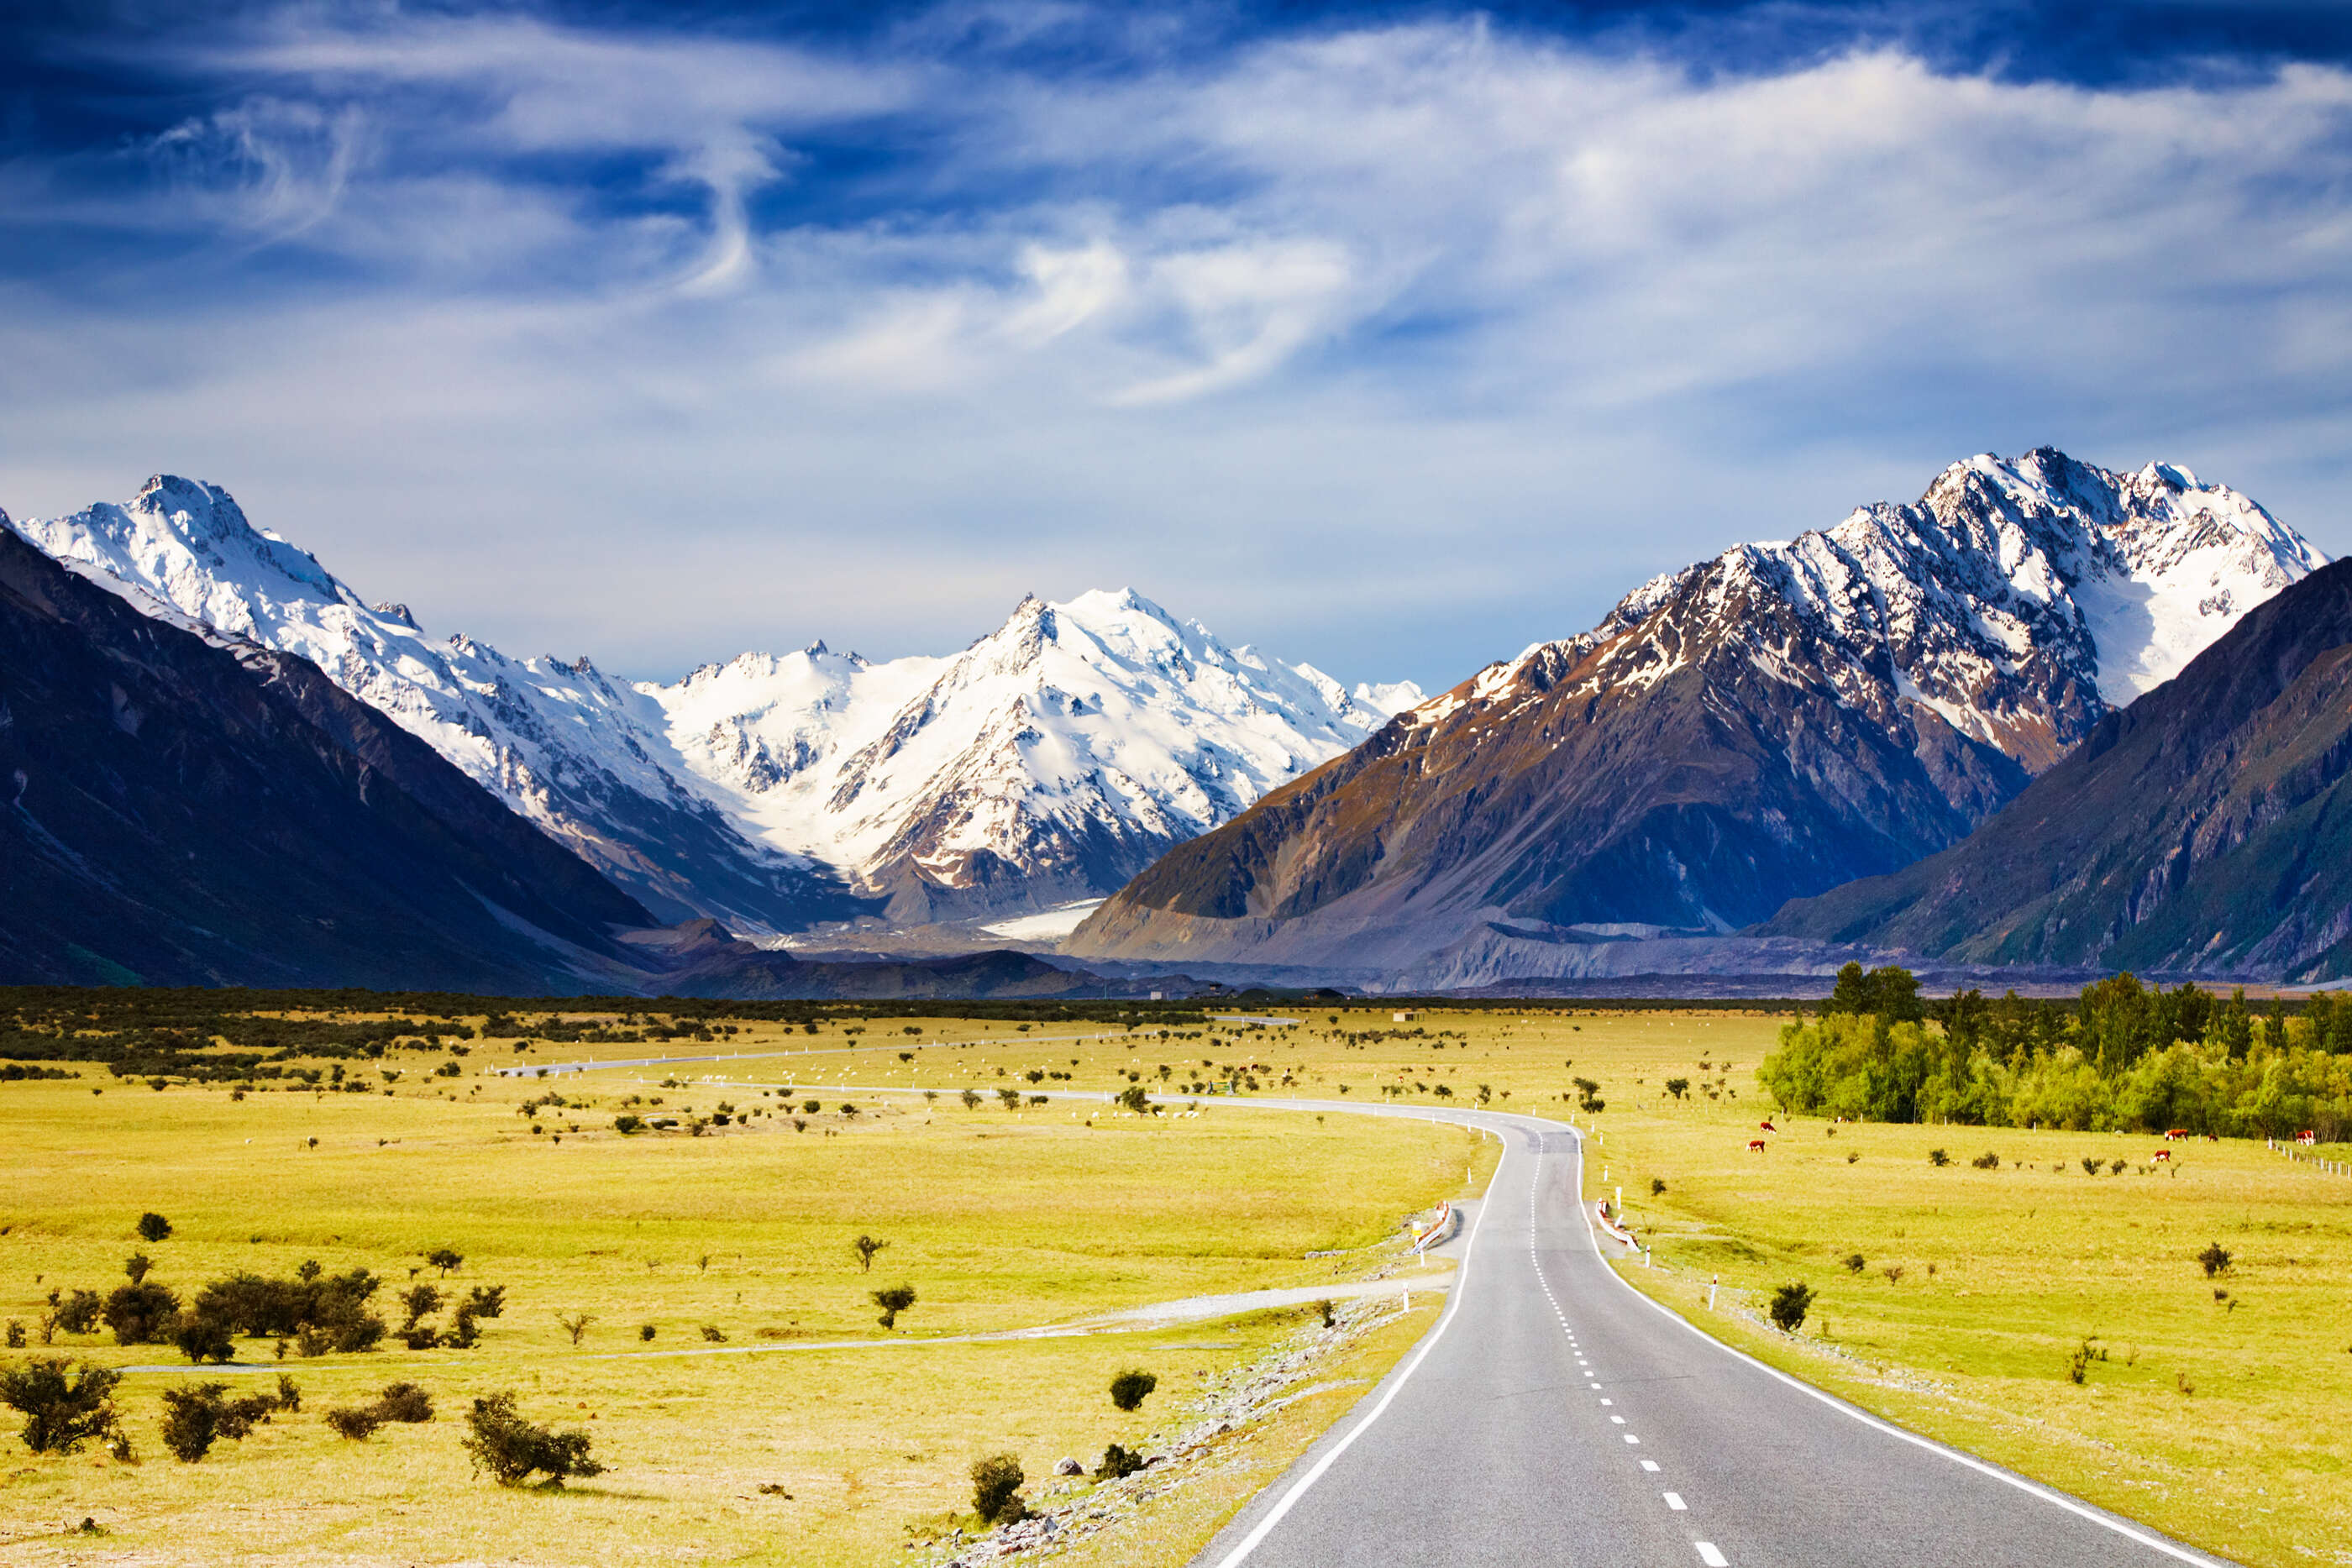 The Southern Alps of New Zealand